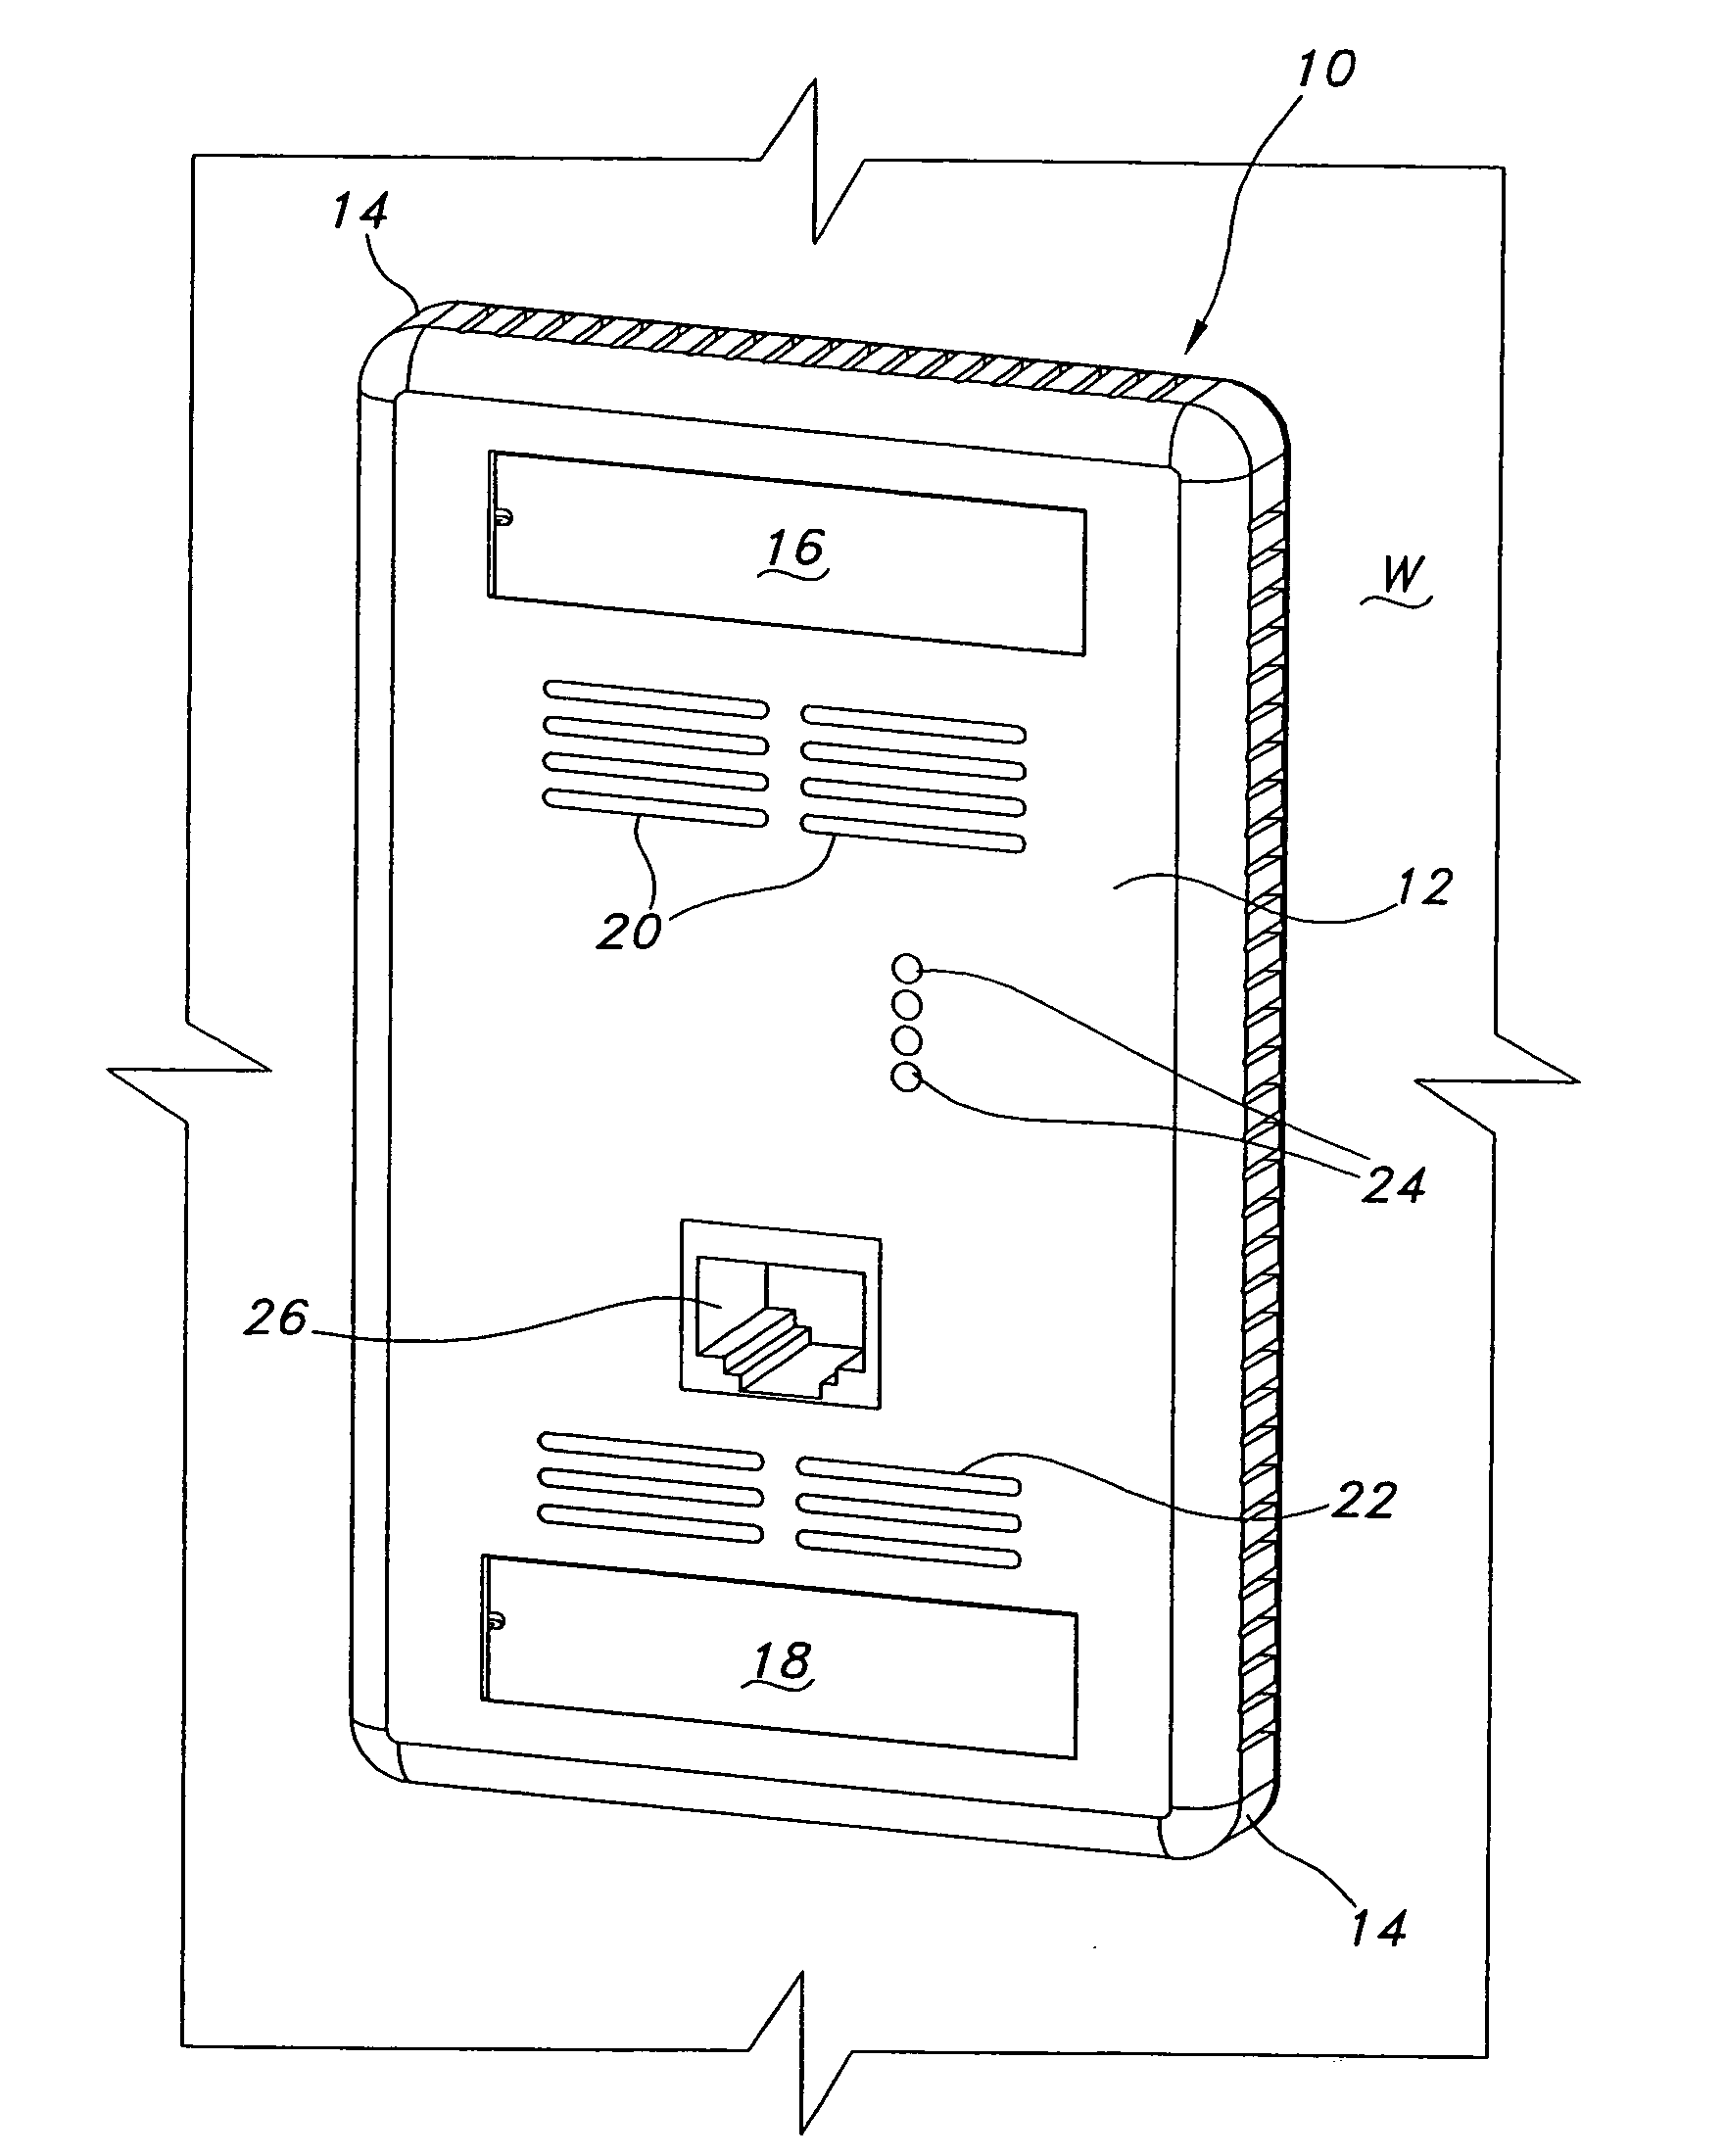 Wireless access point with temperature control system